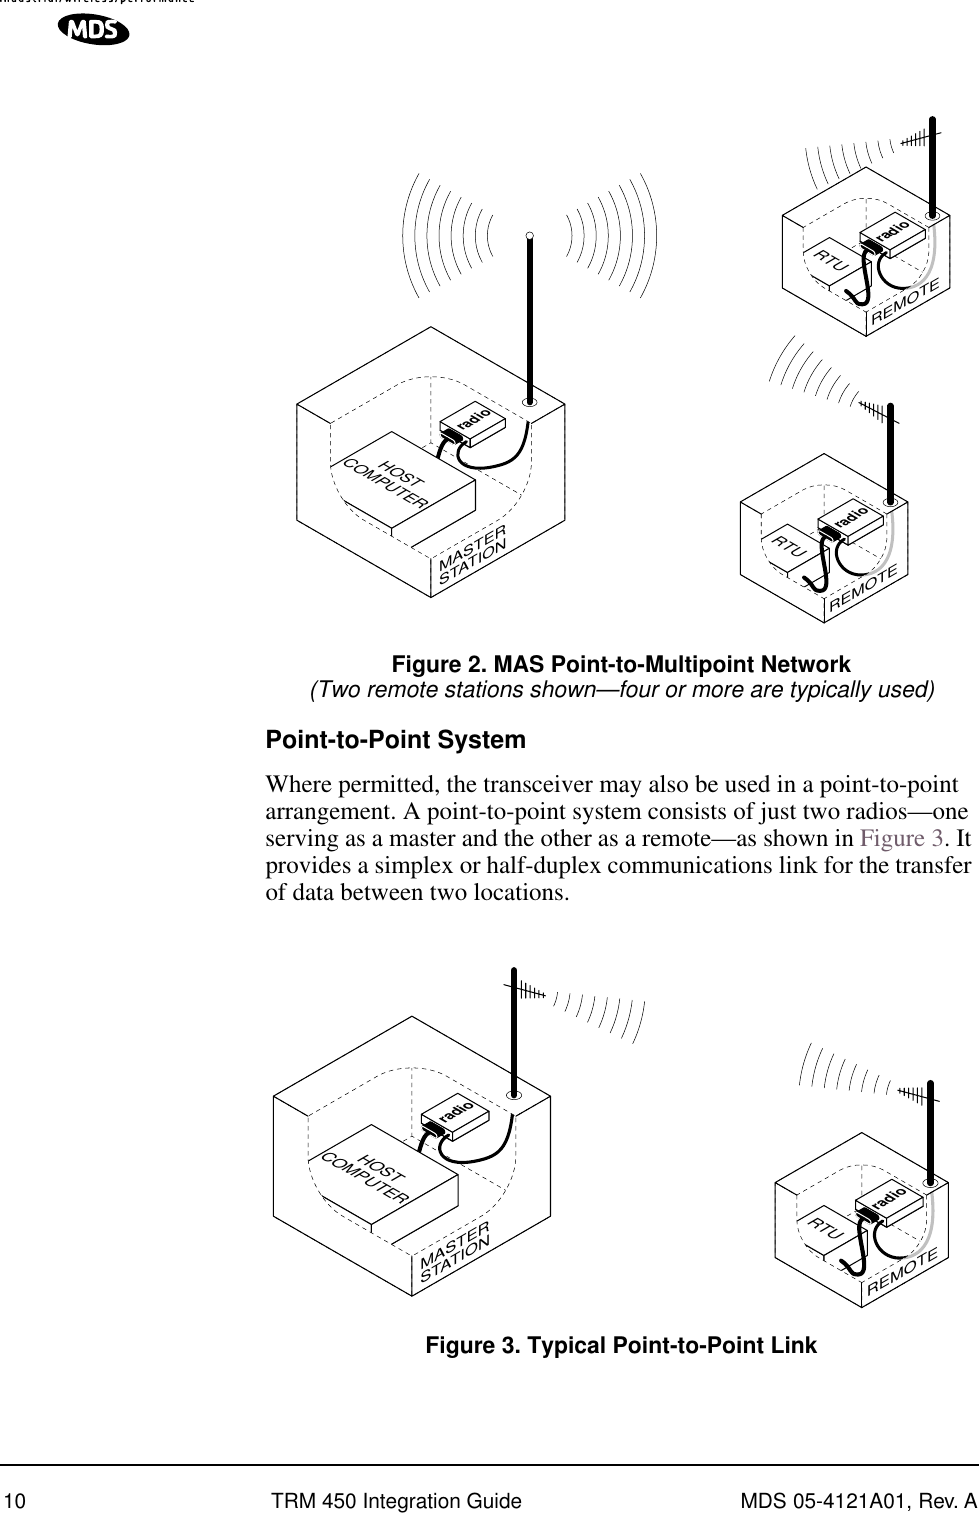  10 TRM 450 Integration Guide MDS 05-4121A01, Rev. A Invisible place holder Figure 2. MAS Point-to-Multipoint Network (Two remote stations shown—four or more are typically used) Point-to-Point System Where permitted, the transceiver may also be used in a point-to-point arrangement.   A point-to-point system consists of just two radios—one serving as a master and the other as a remote—as shown in Figure 3. It provides a simplex or half-duplex communications link for the transfer of data between two locations. Invisible place holder Figure 3. Typical Point-to-Point LinkradioHOSTCOMPUTERMASTERSTATIONRTUradioREMOTERTUradioREMOTEradioHOSTCOMPUTERMASTERSTATIONRTUradioREMOTE